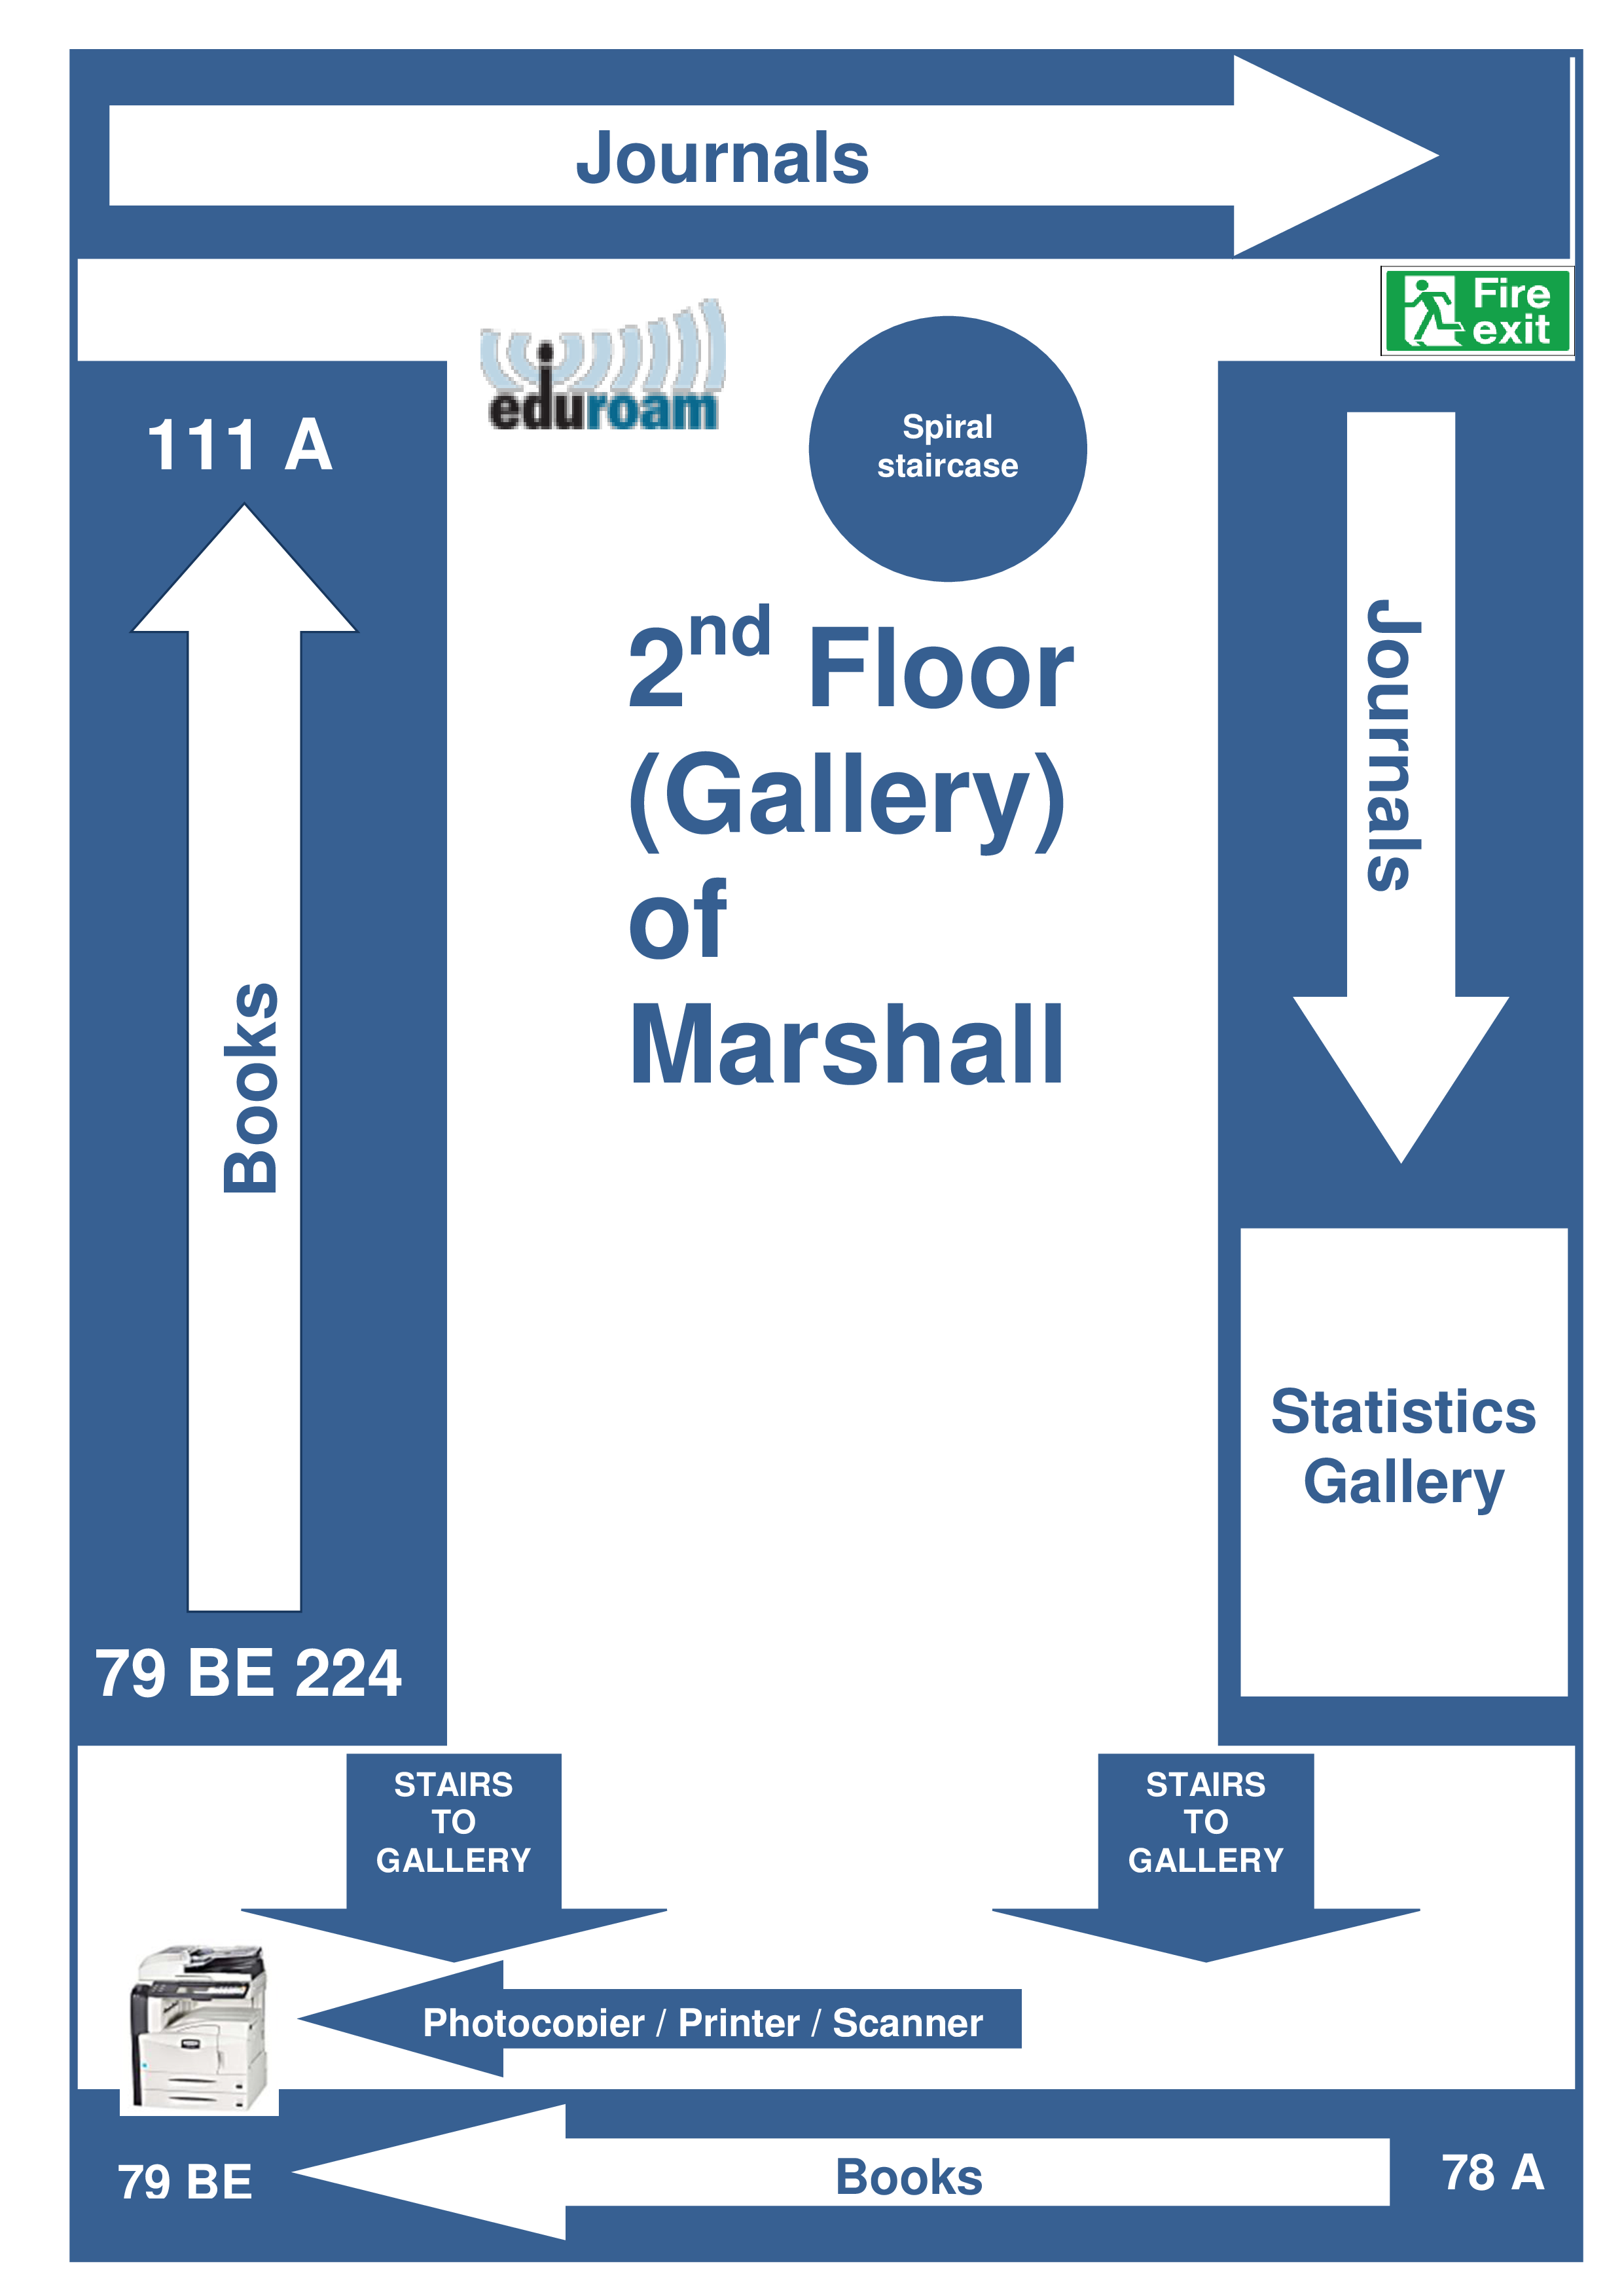 Gallery / 2nd floor of Marshall Library plan